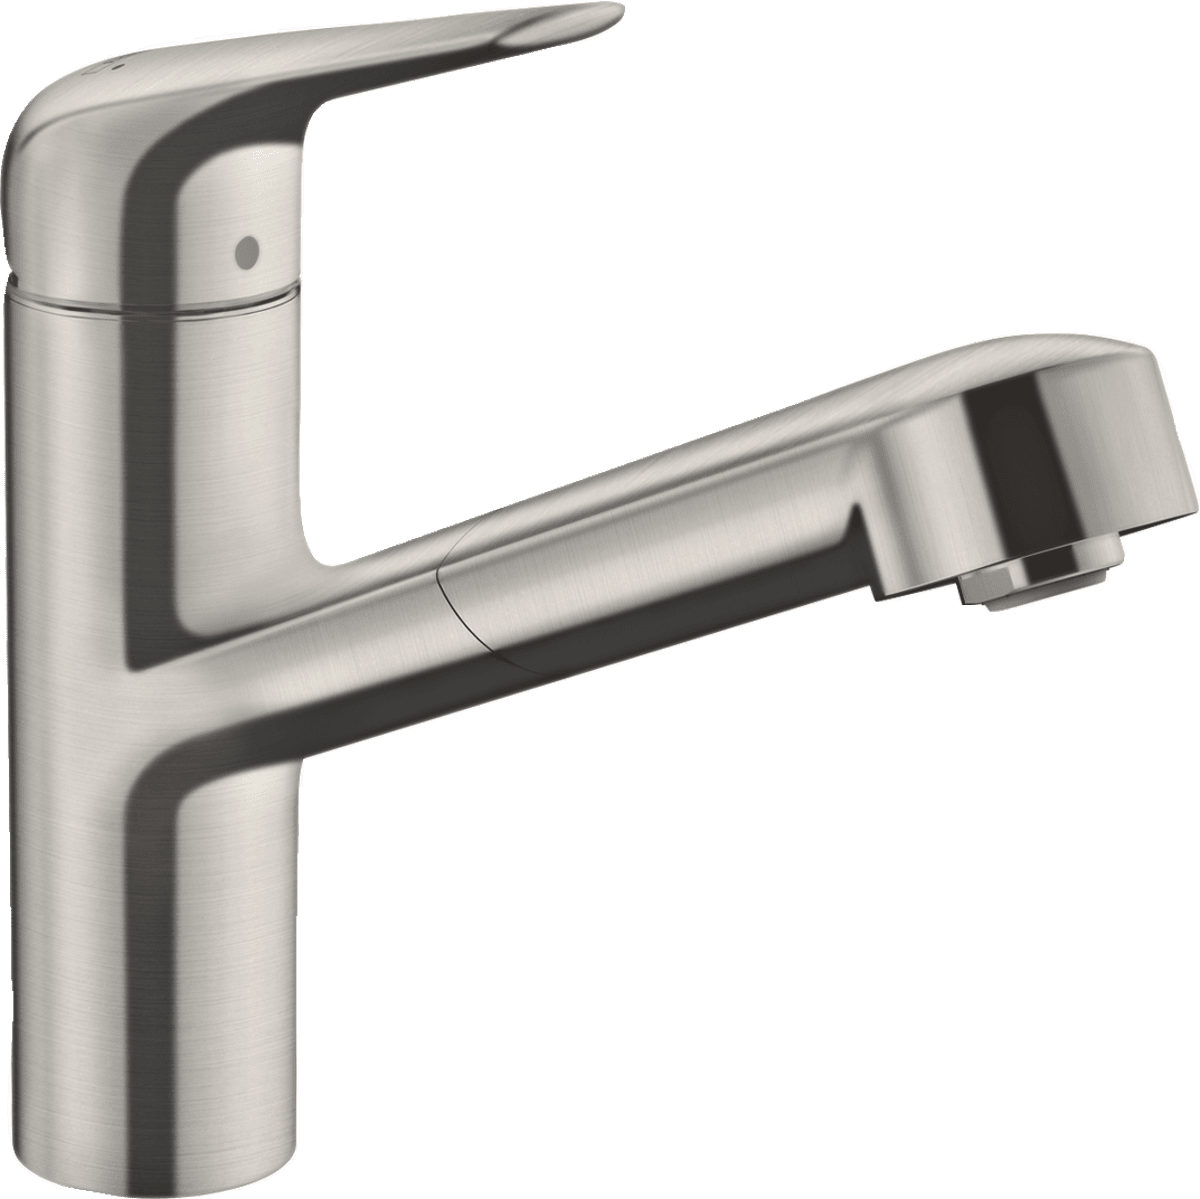 Picture of HANSGROHE Focus M42 Single lever kitchen mixer 150, pull-out spout, 1jet, sBox #71829800 - Stainless Steel Finish